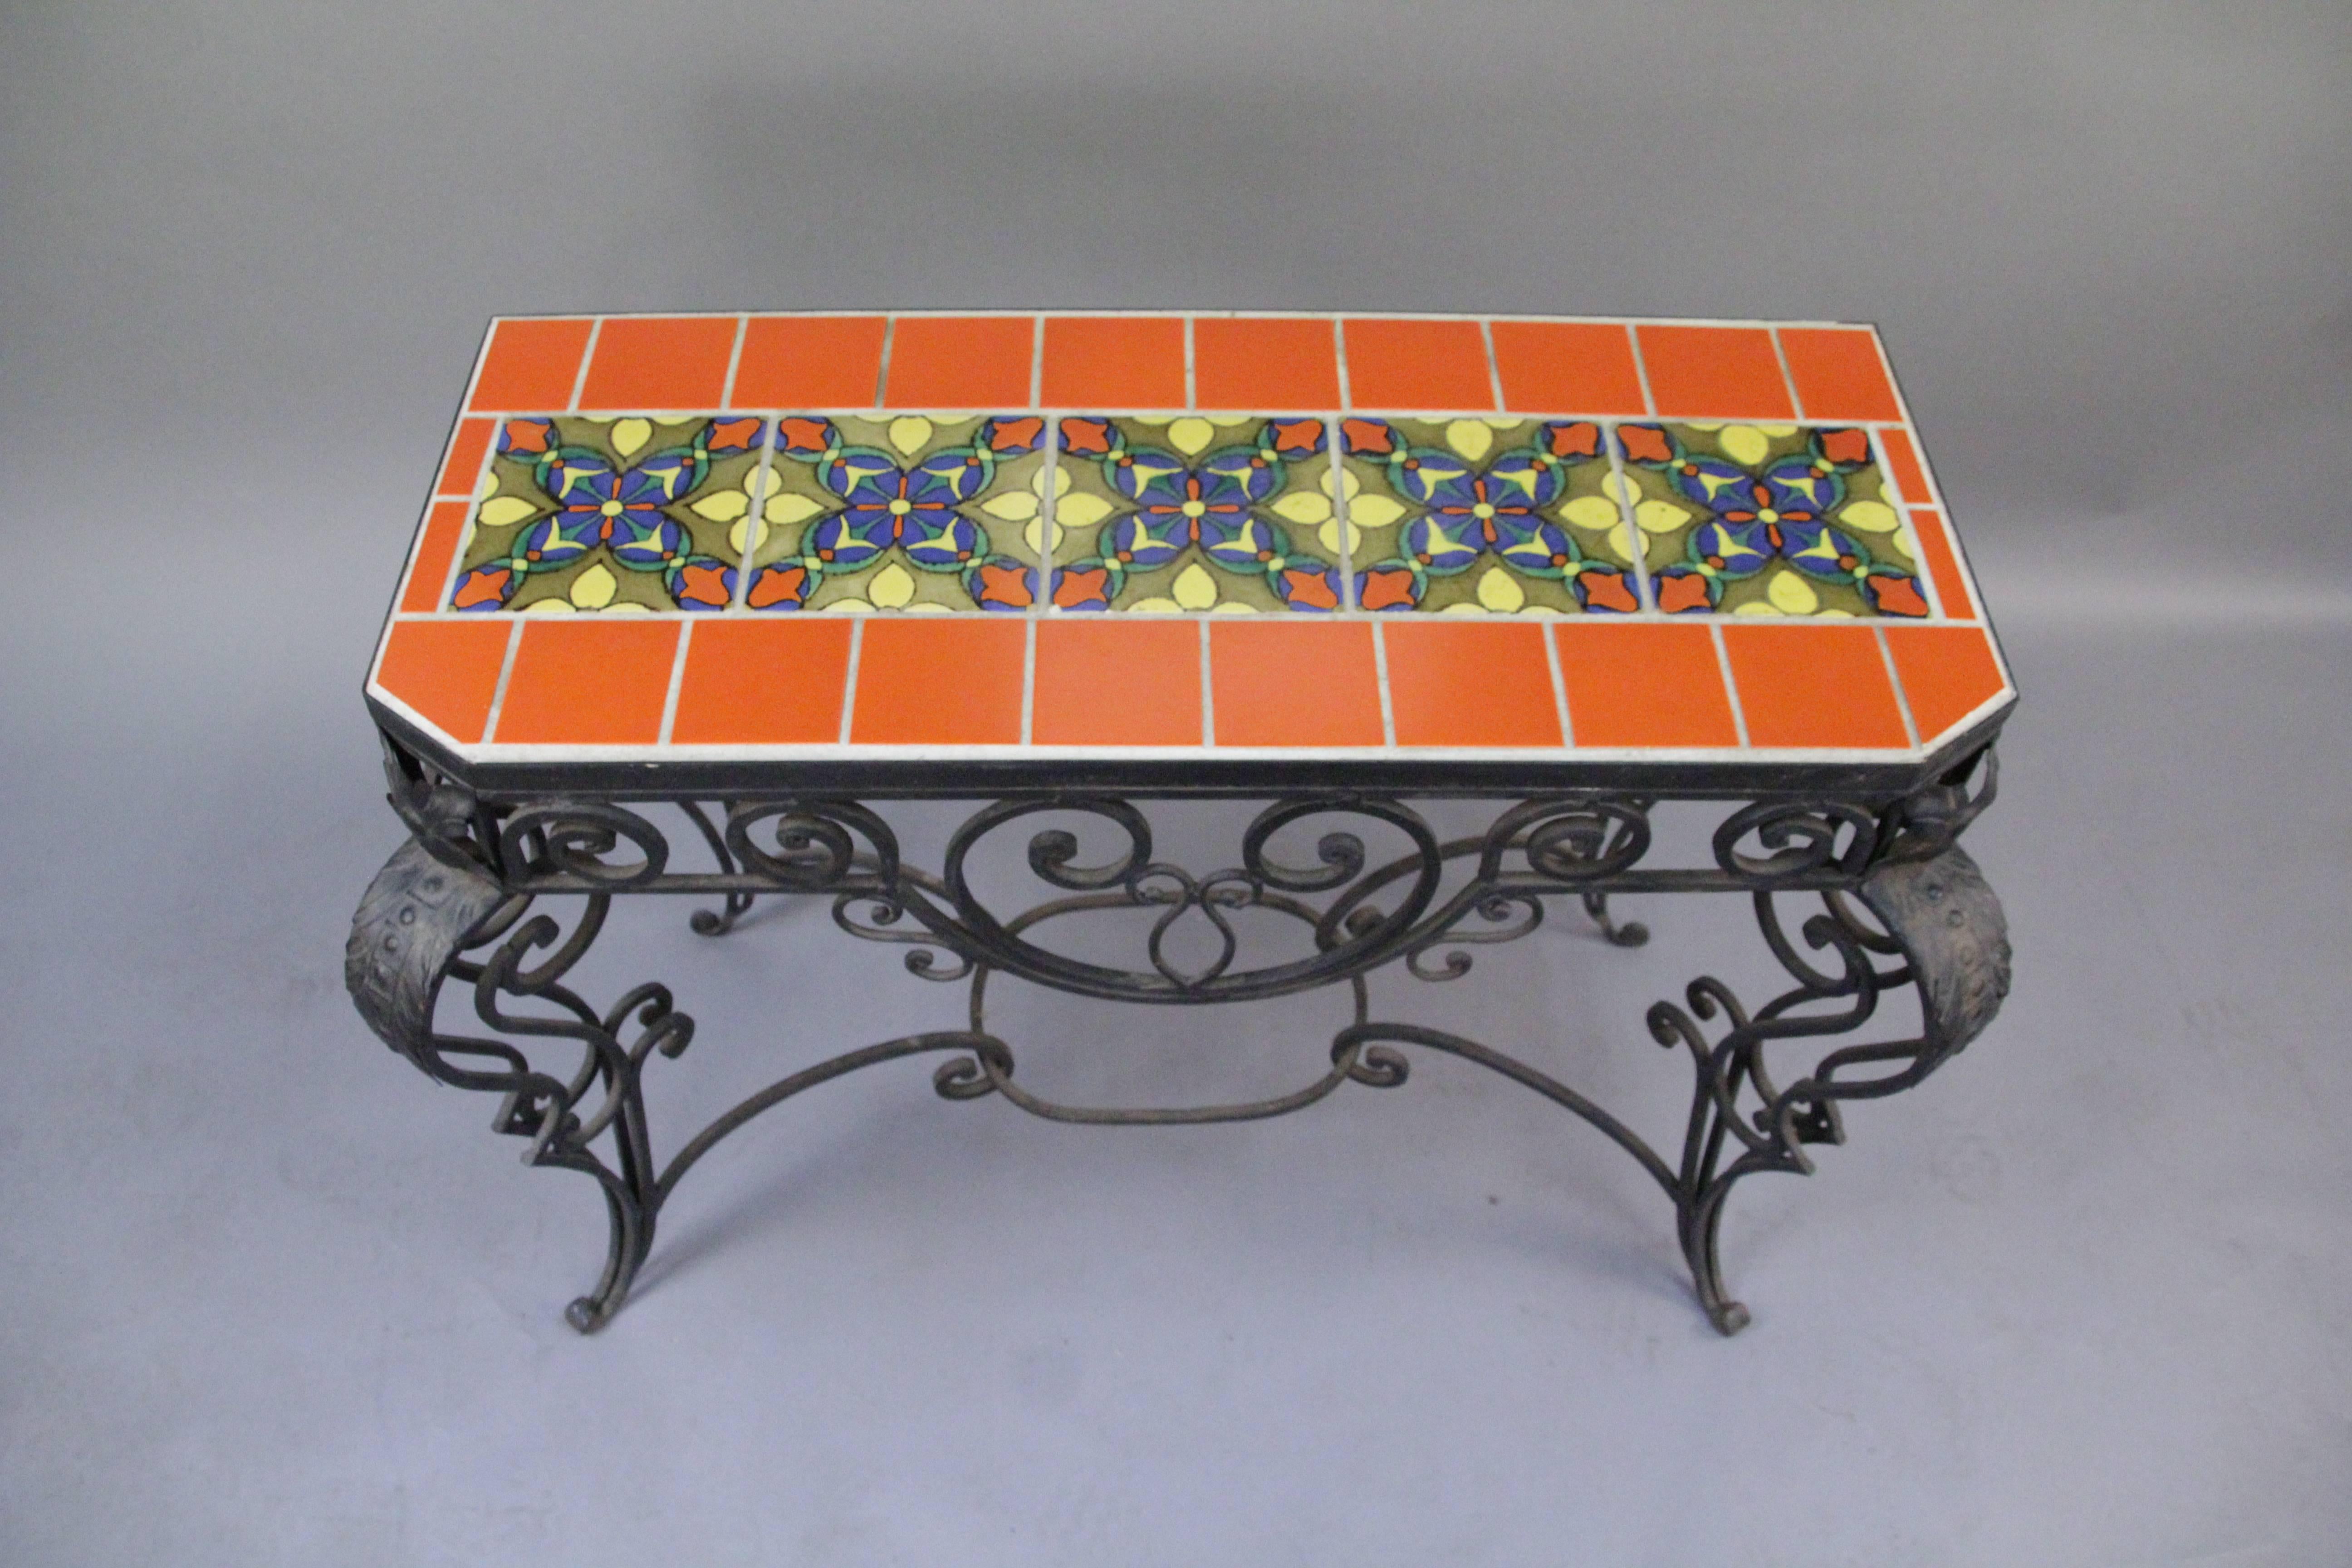 1920s Spanish Revival console table with intricate ironwork. Inlaid with beautiful, geometric Malibu tiles.